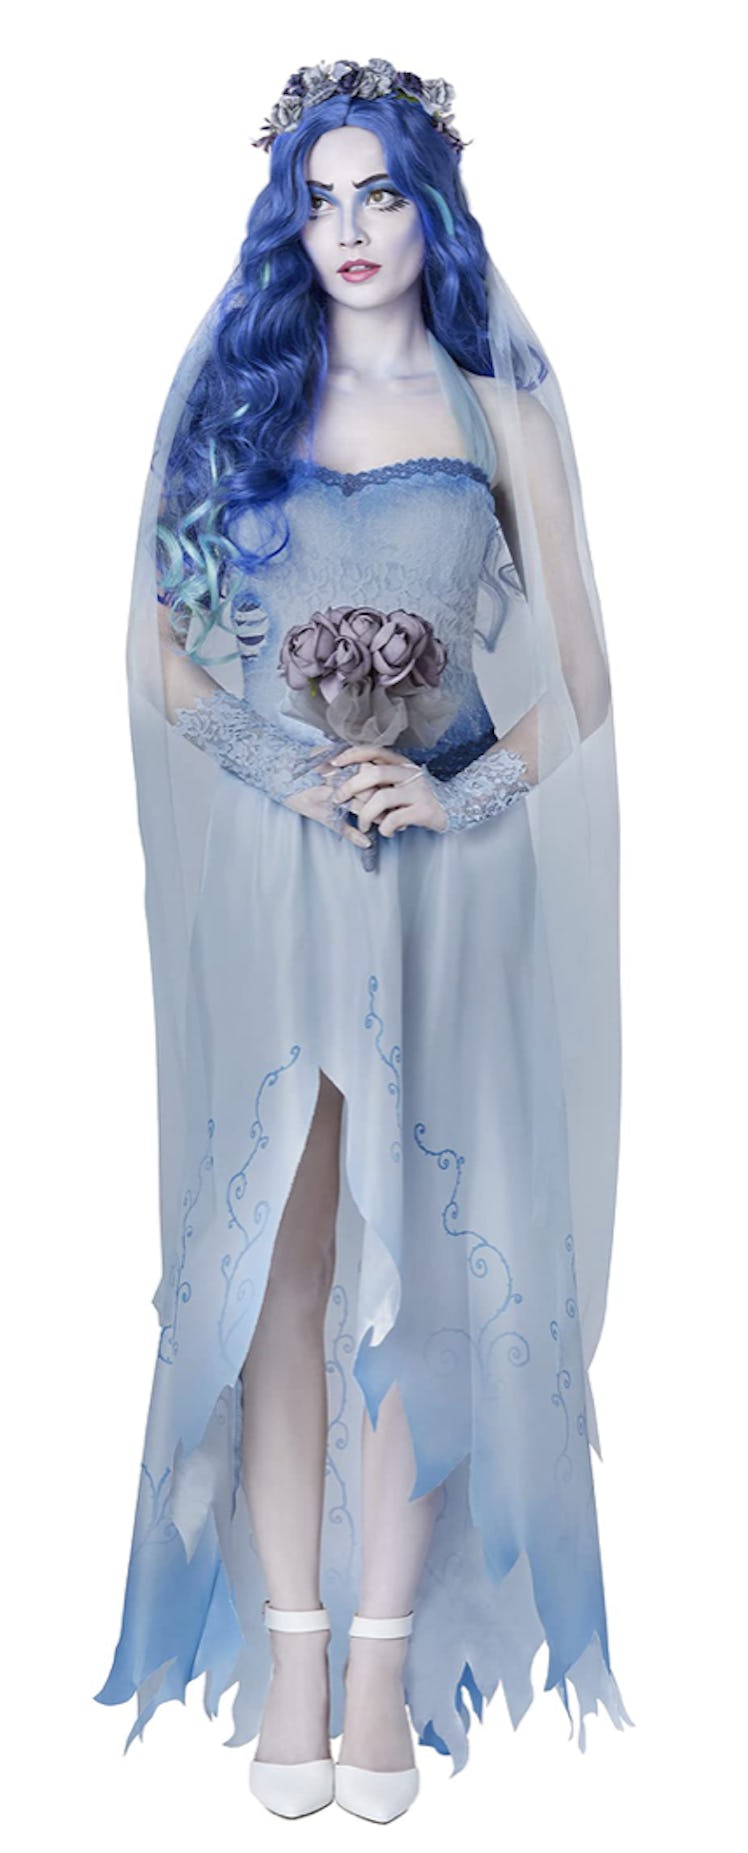 Emily from corpse bride costume from spirit halloween